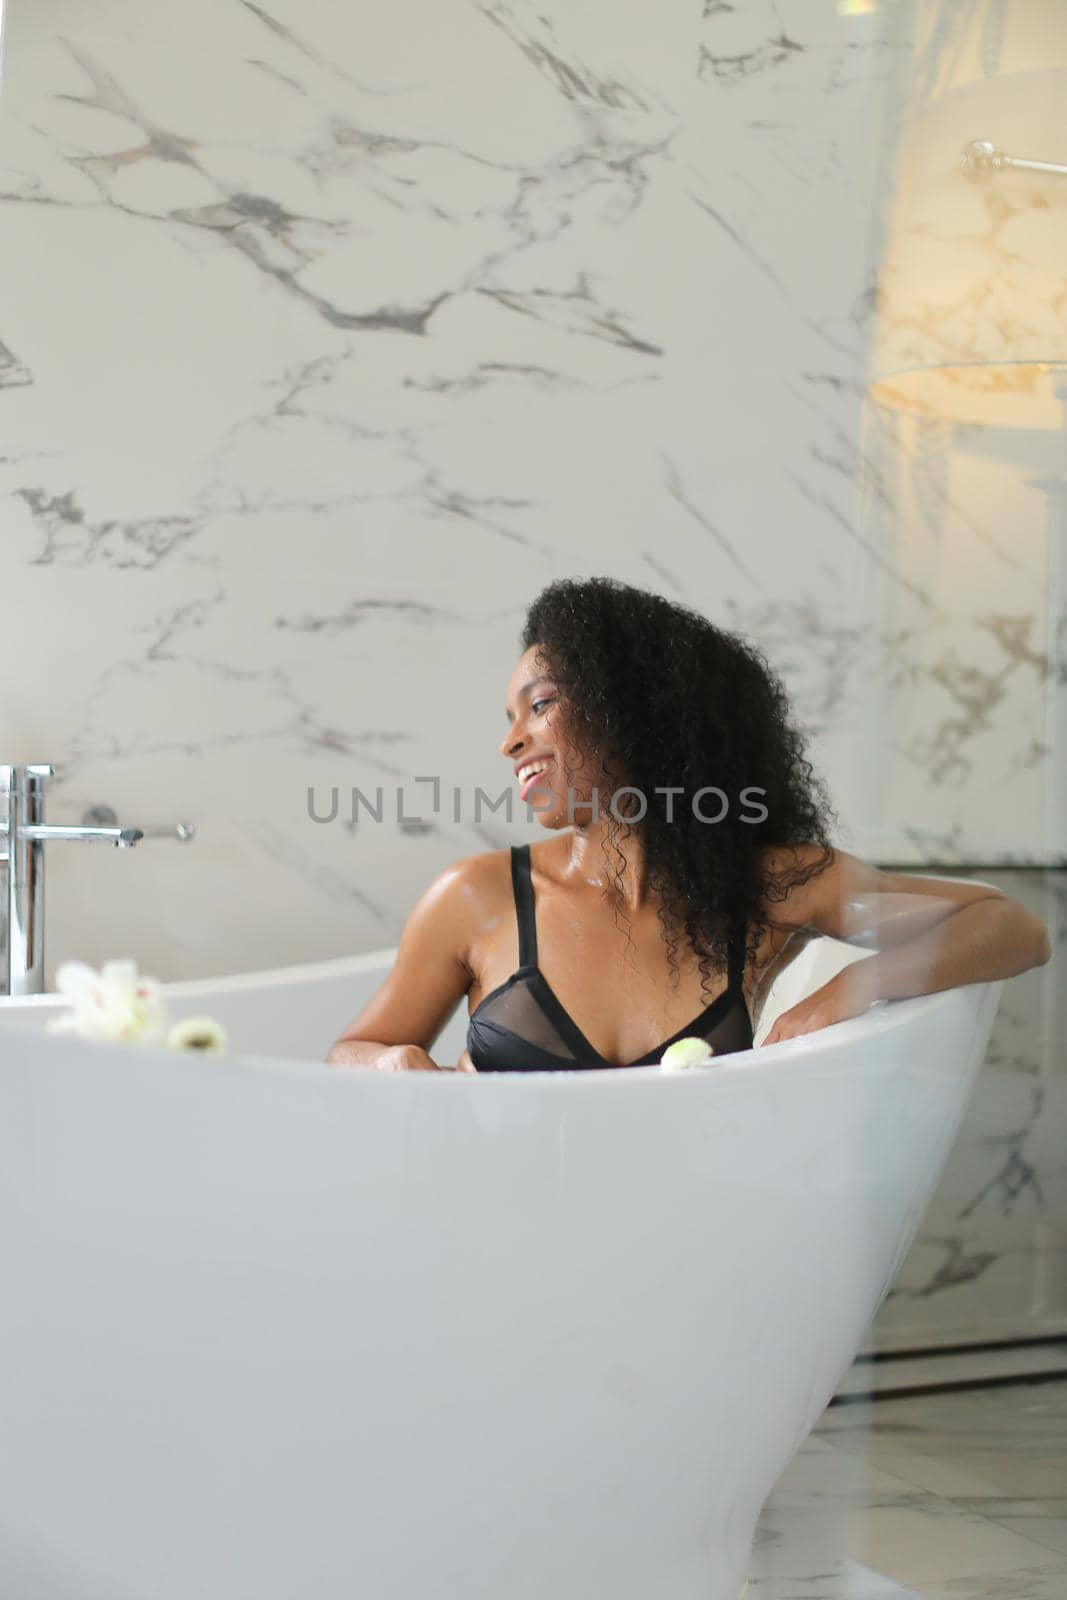 Afro american woman sittling in bath and wearing black swimsuit, marble wall in background. Cocept of bathroom photo shoot and morning hygiene.